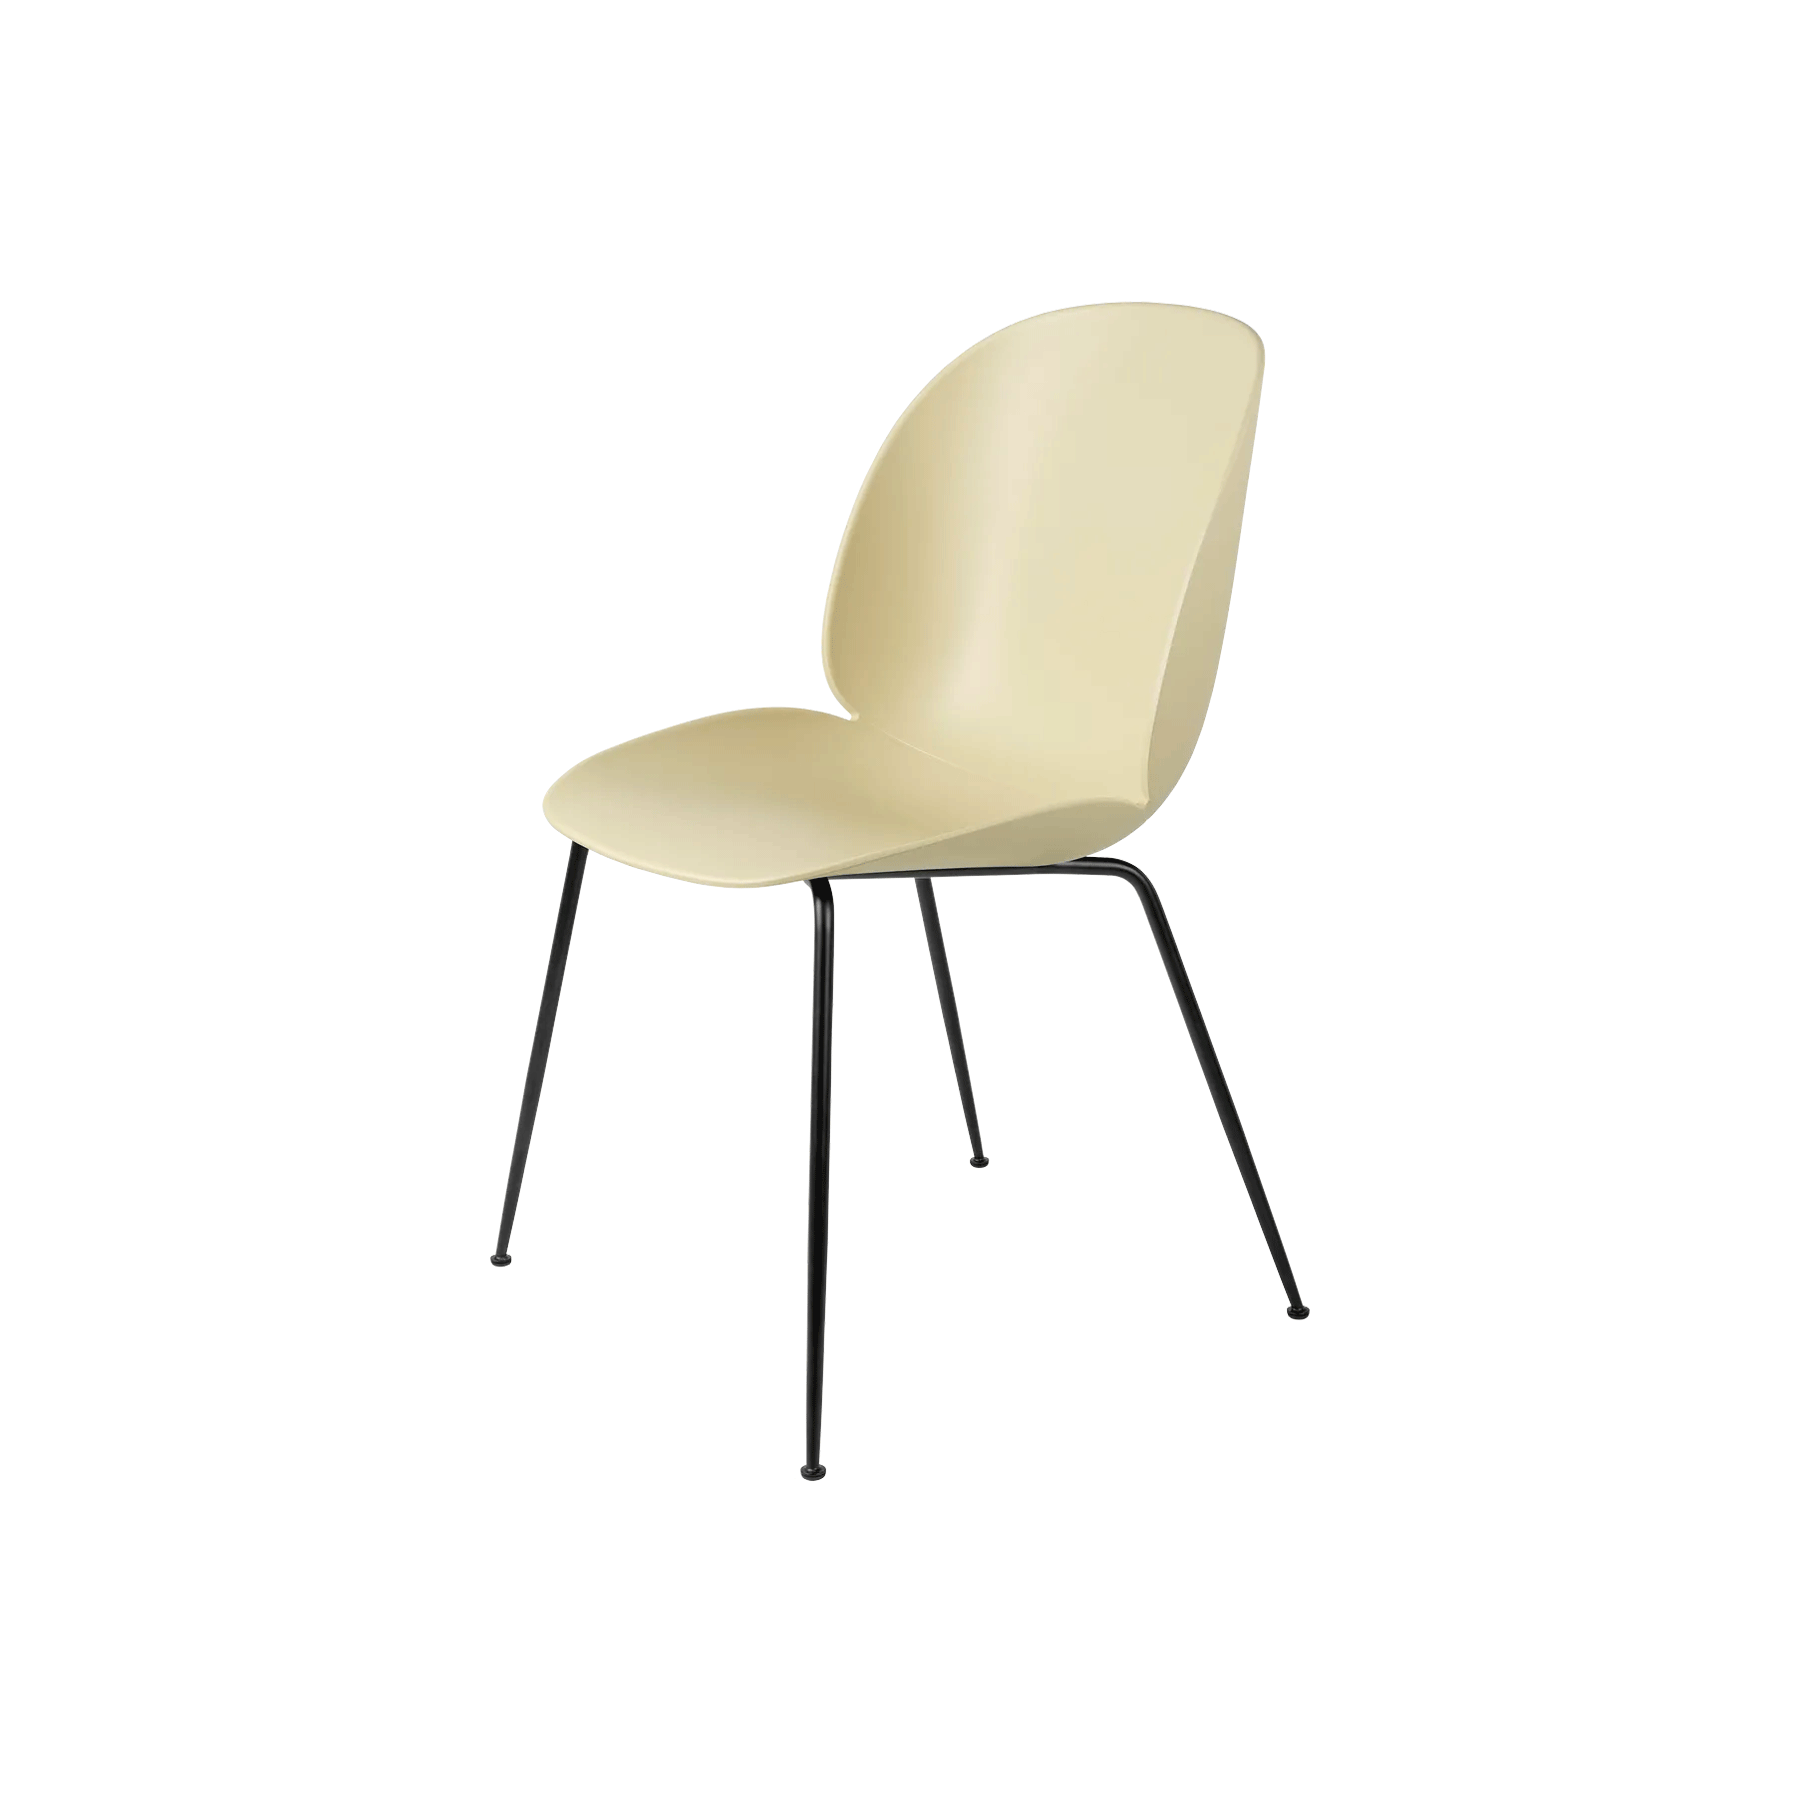 Beetle dining chair, Conic base - Moleta Munro Limited